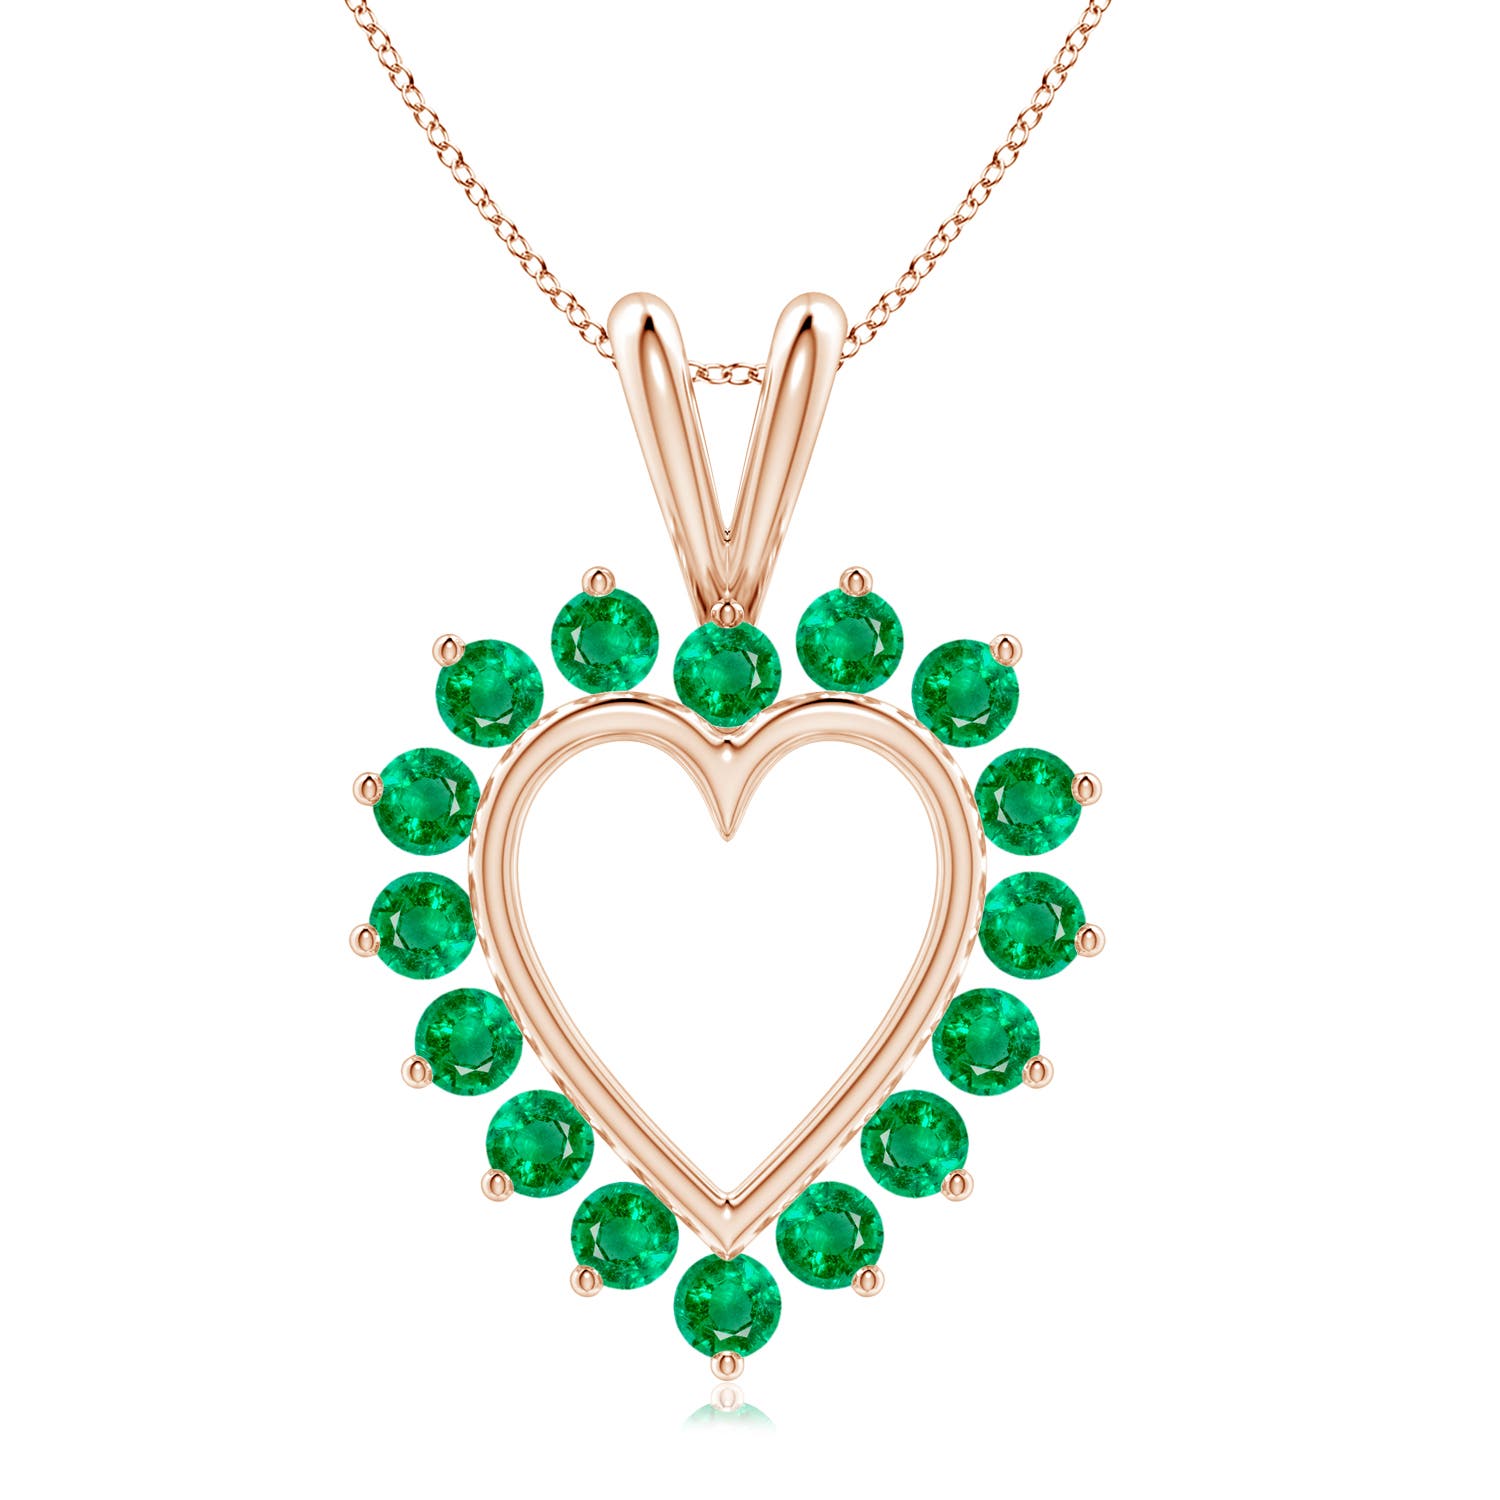 AAA - Emerald / 0.72 CT / 14 KT Rose Gold